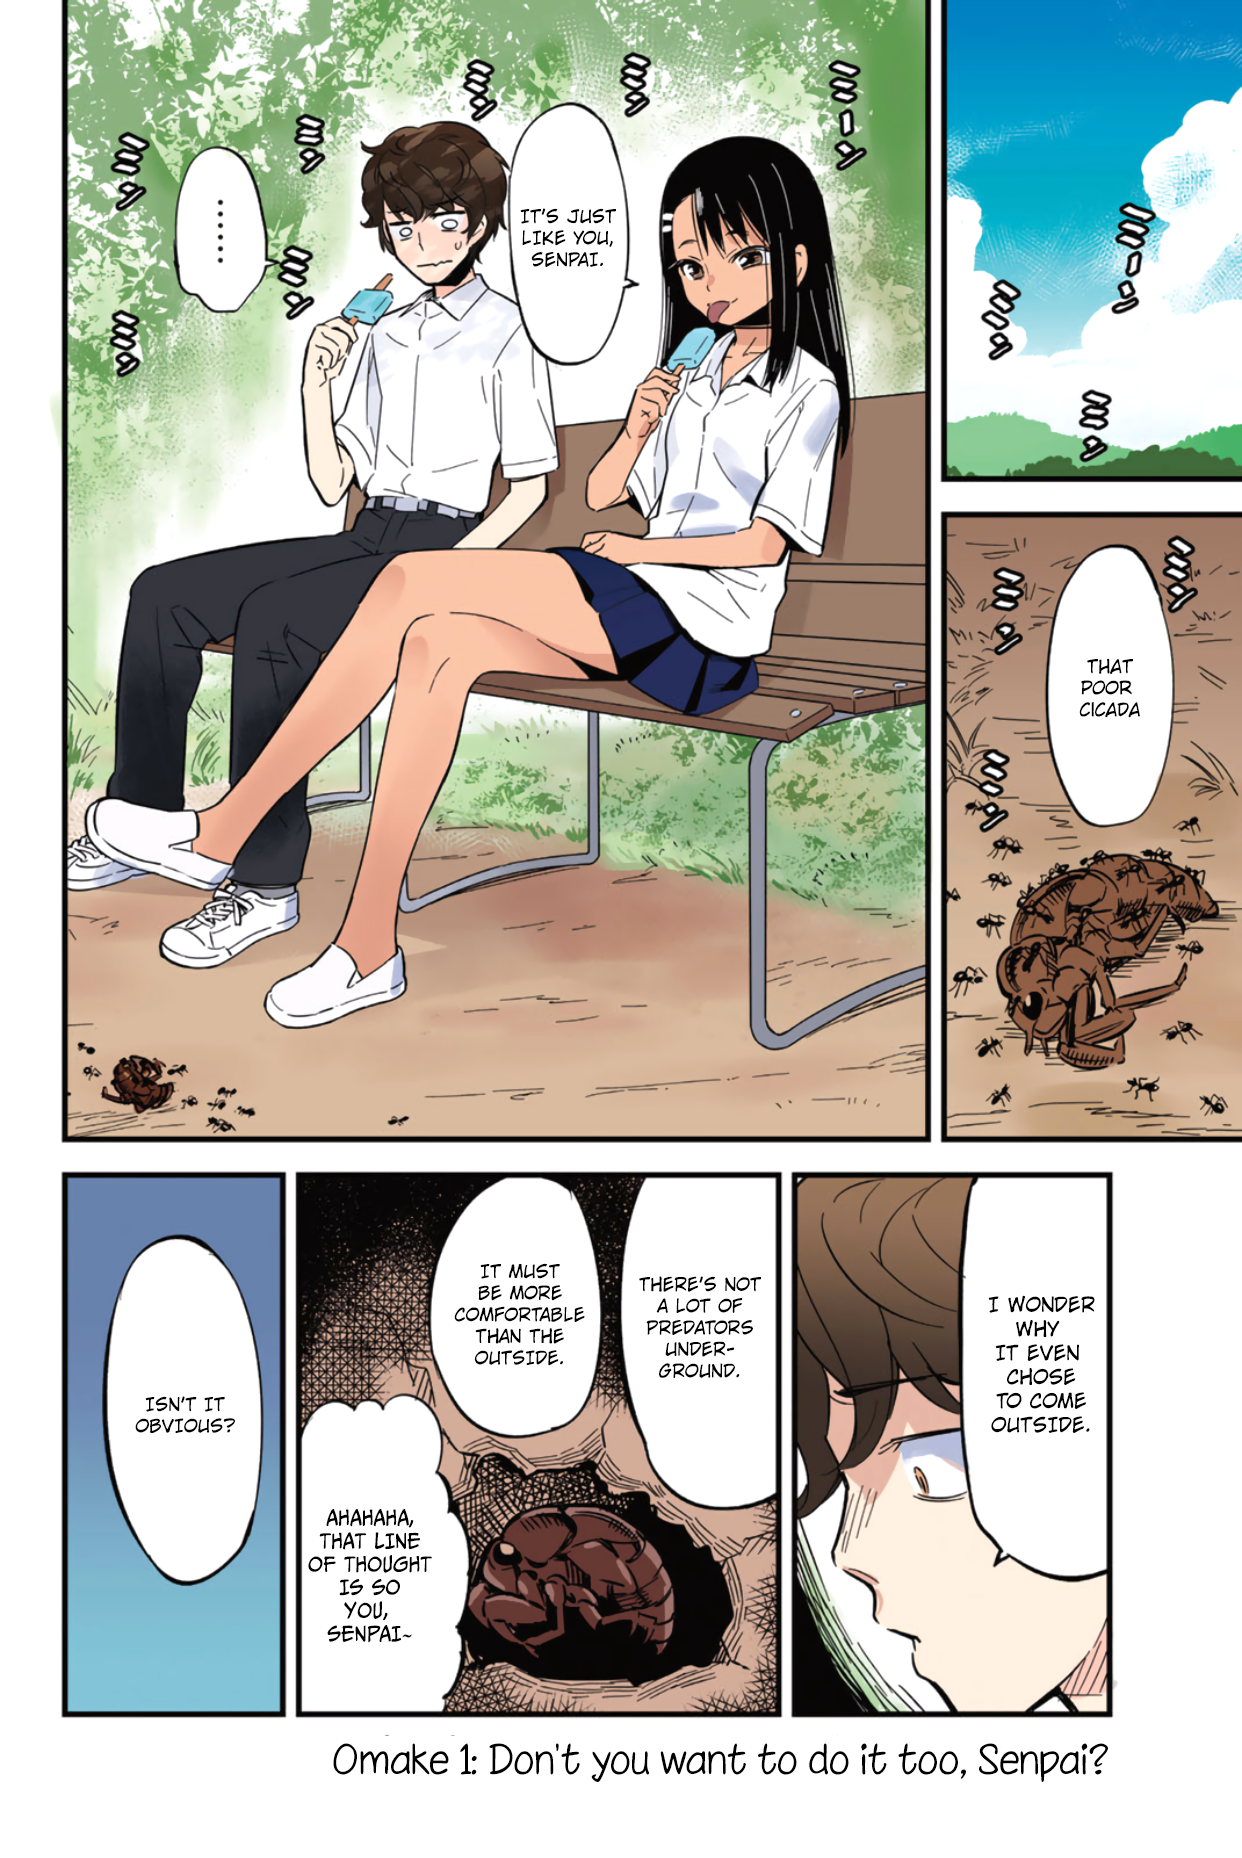 Ijiranaide, Nagatoro-San Vol.2 Chapter 14.3: Colored Omake 1: Don't You Want To Do It Too, Senpai? - Picture 1